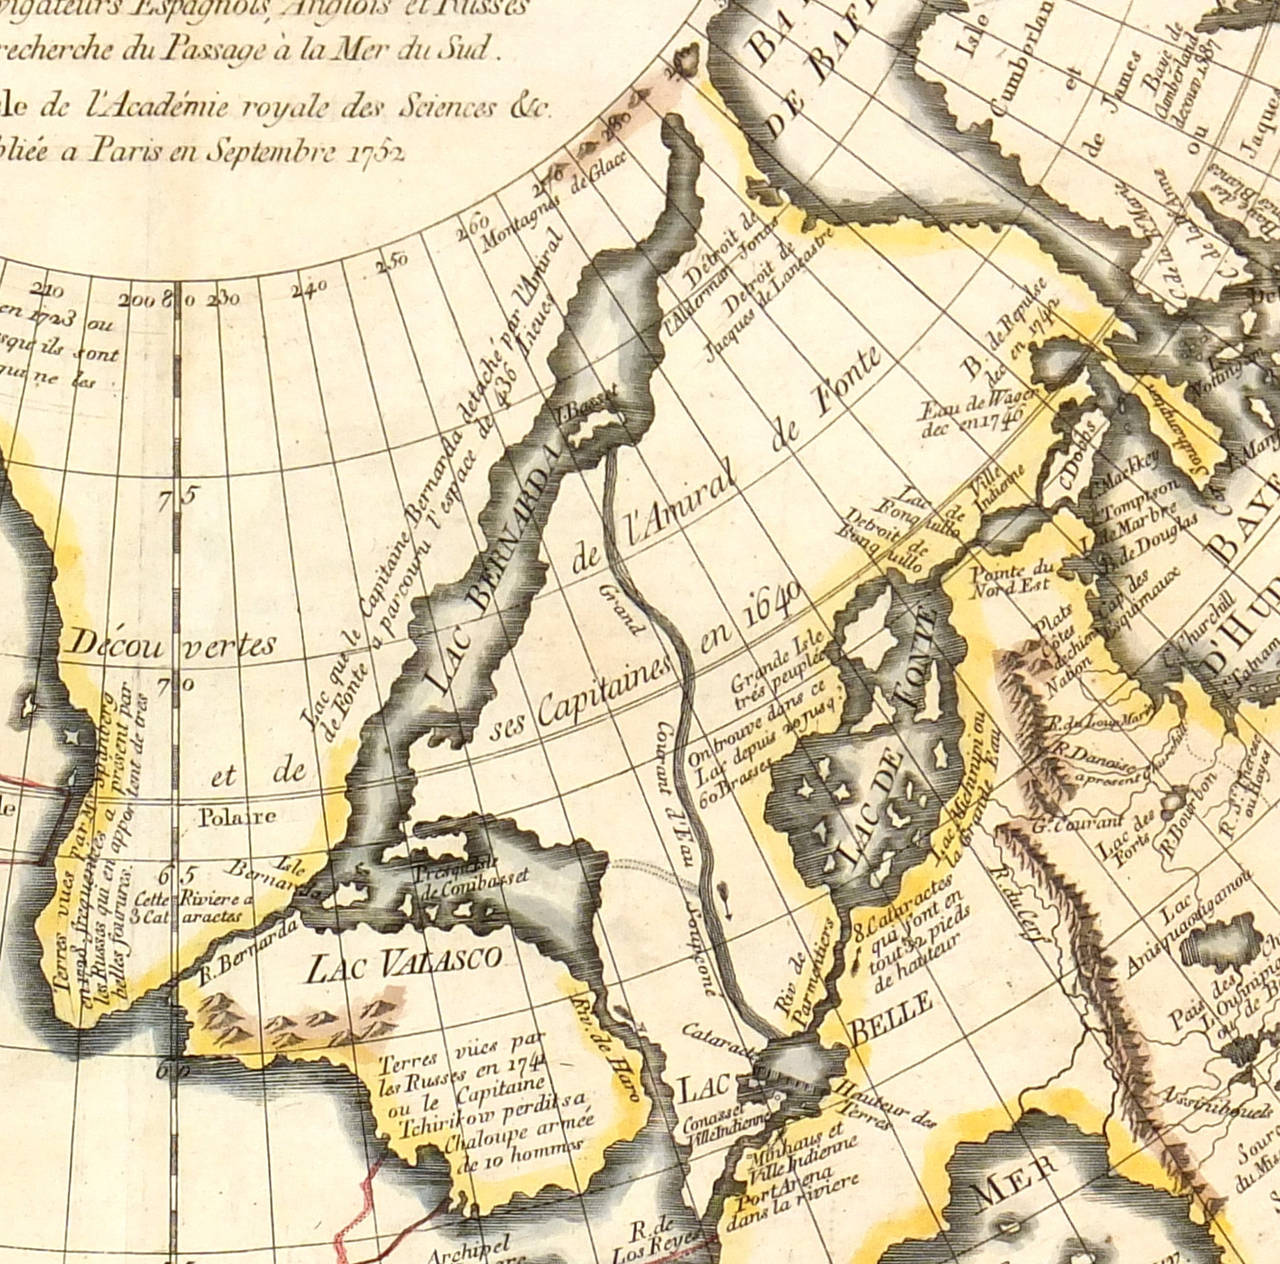 Hand colored, vintage French copper engraving map showing the apocryphal discoveries of Admiral de Fonte of a Northwest passage through the North American continent by French Royal cartographer De Vaugondy, 1752. Many annotations explain various